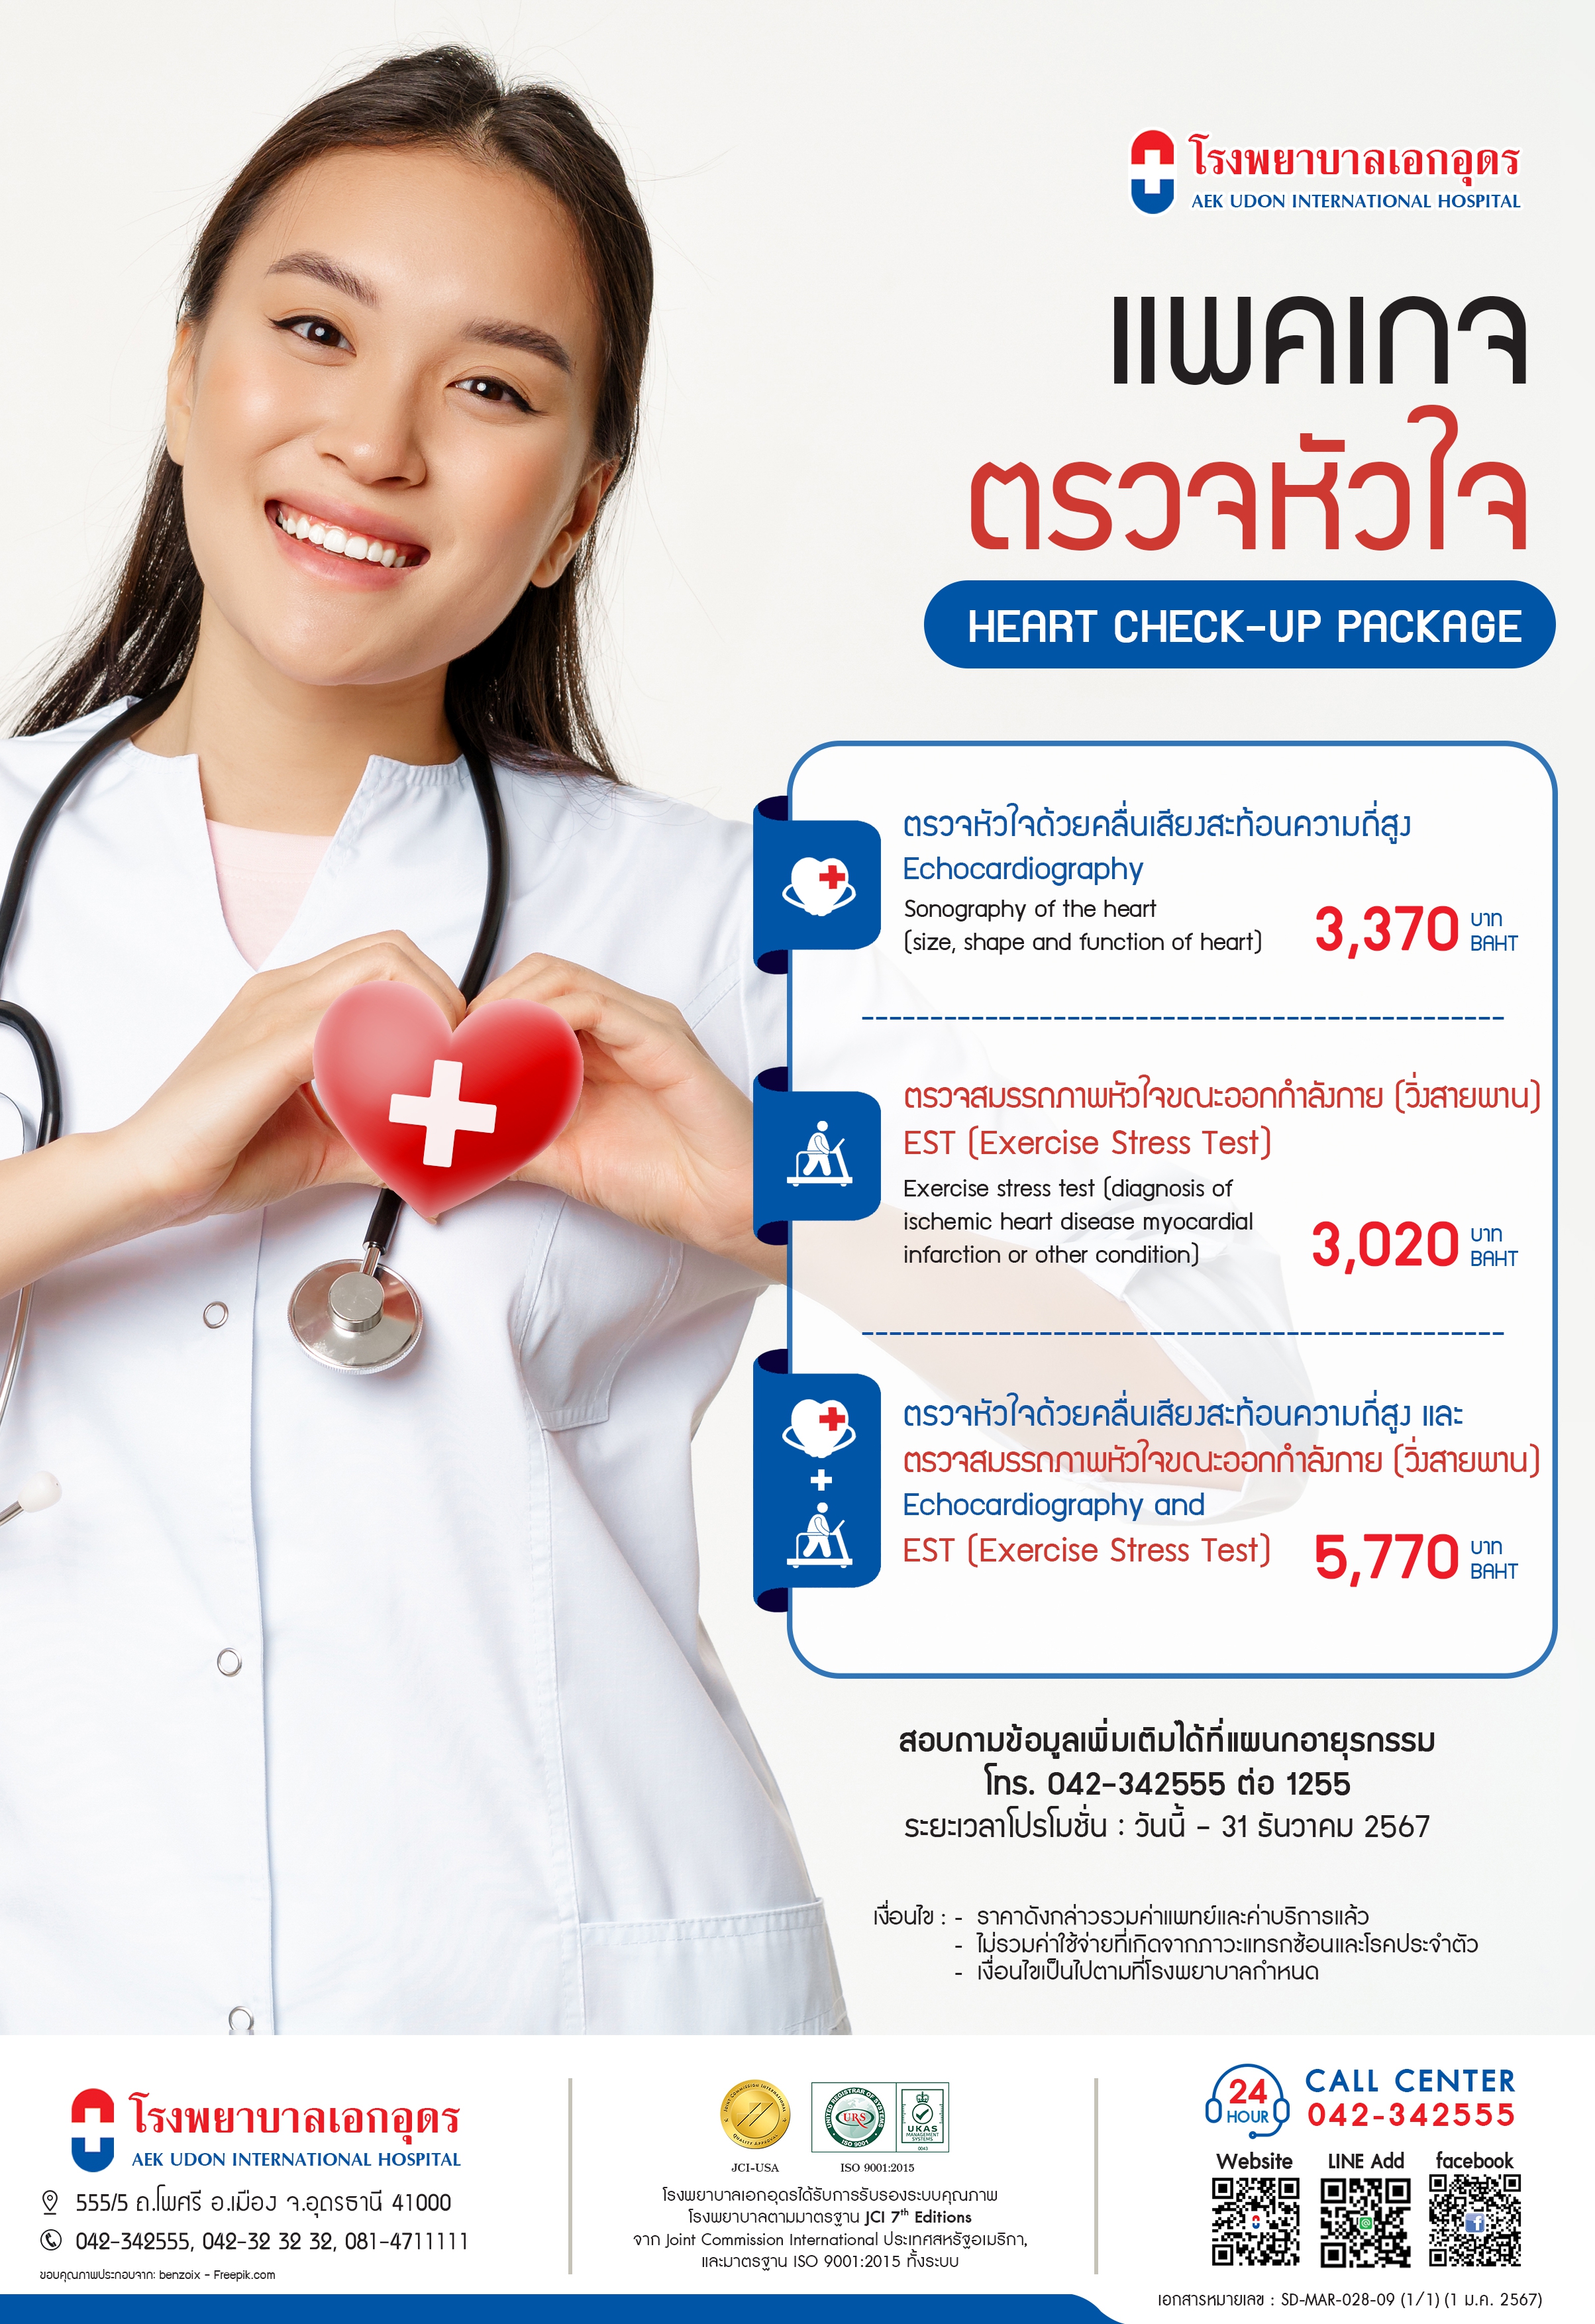 HEART CHECK-UP PACKAGE